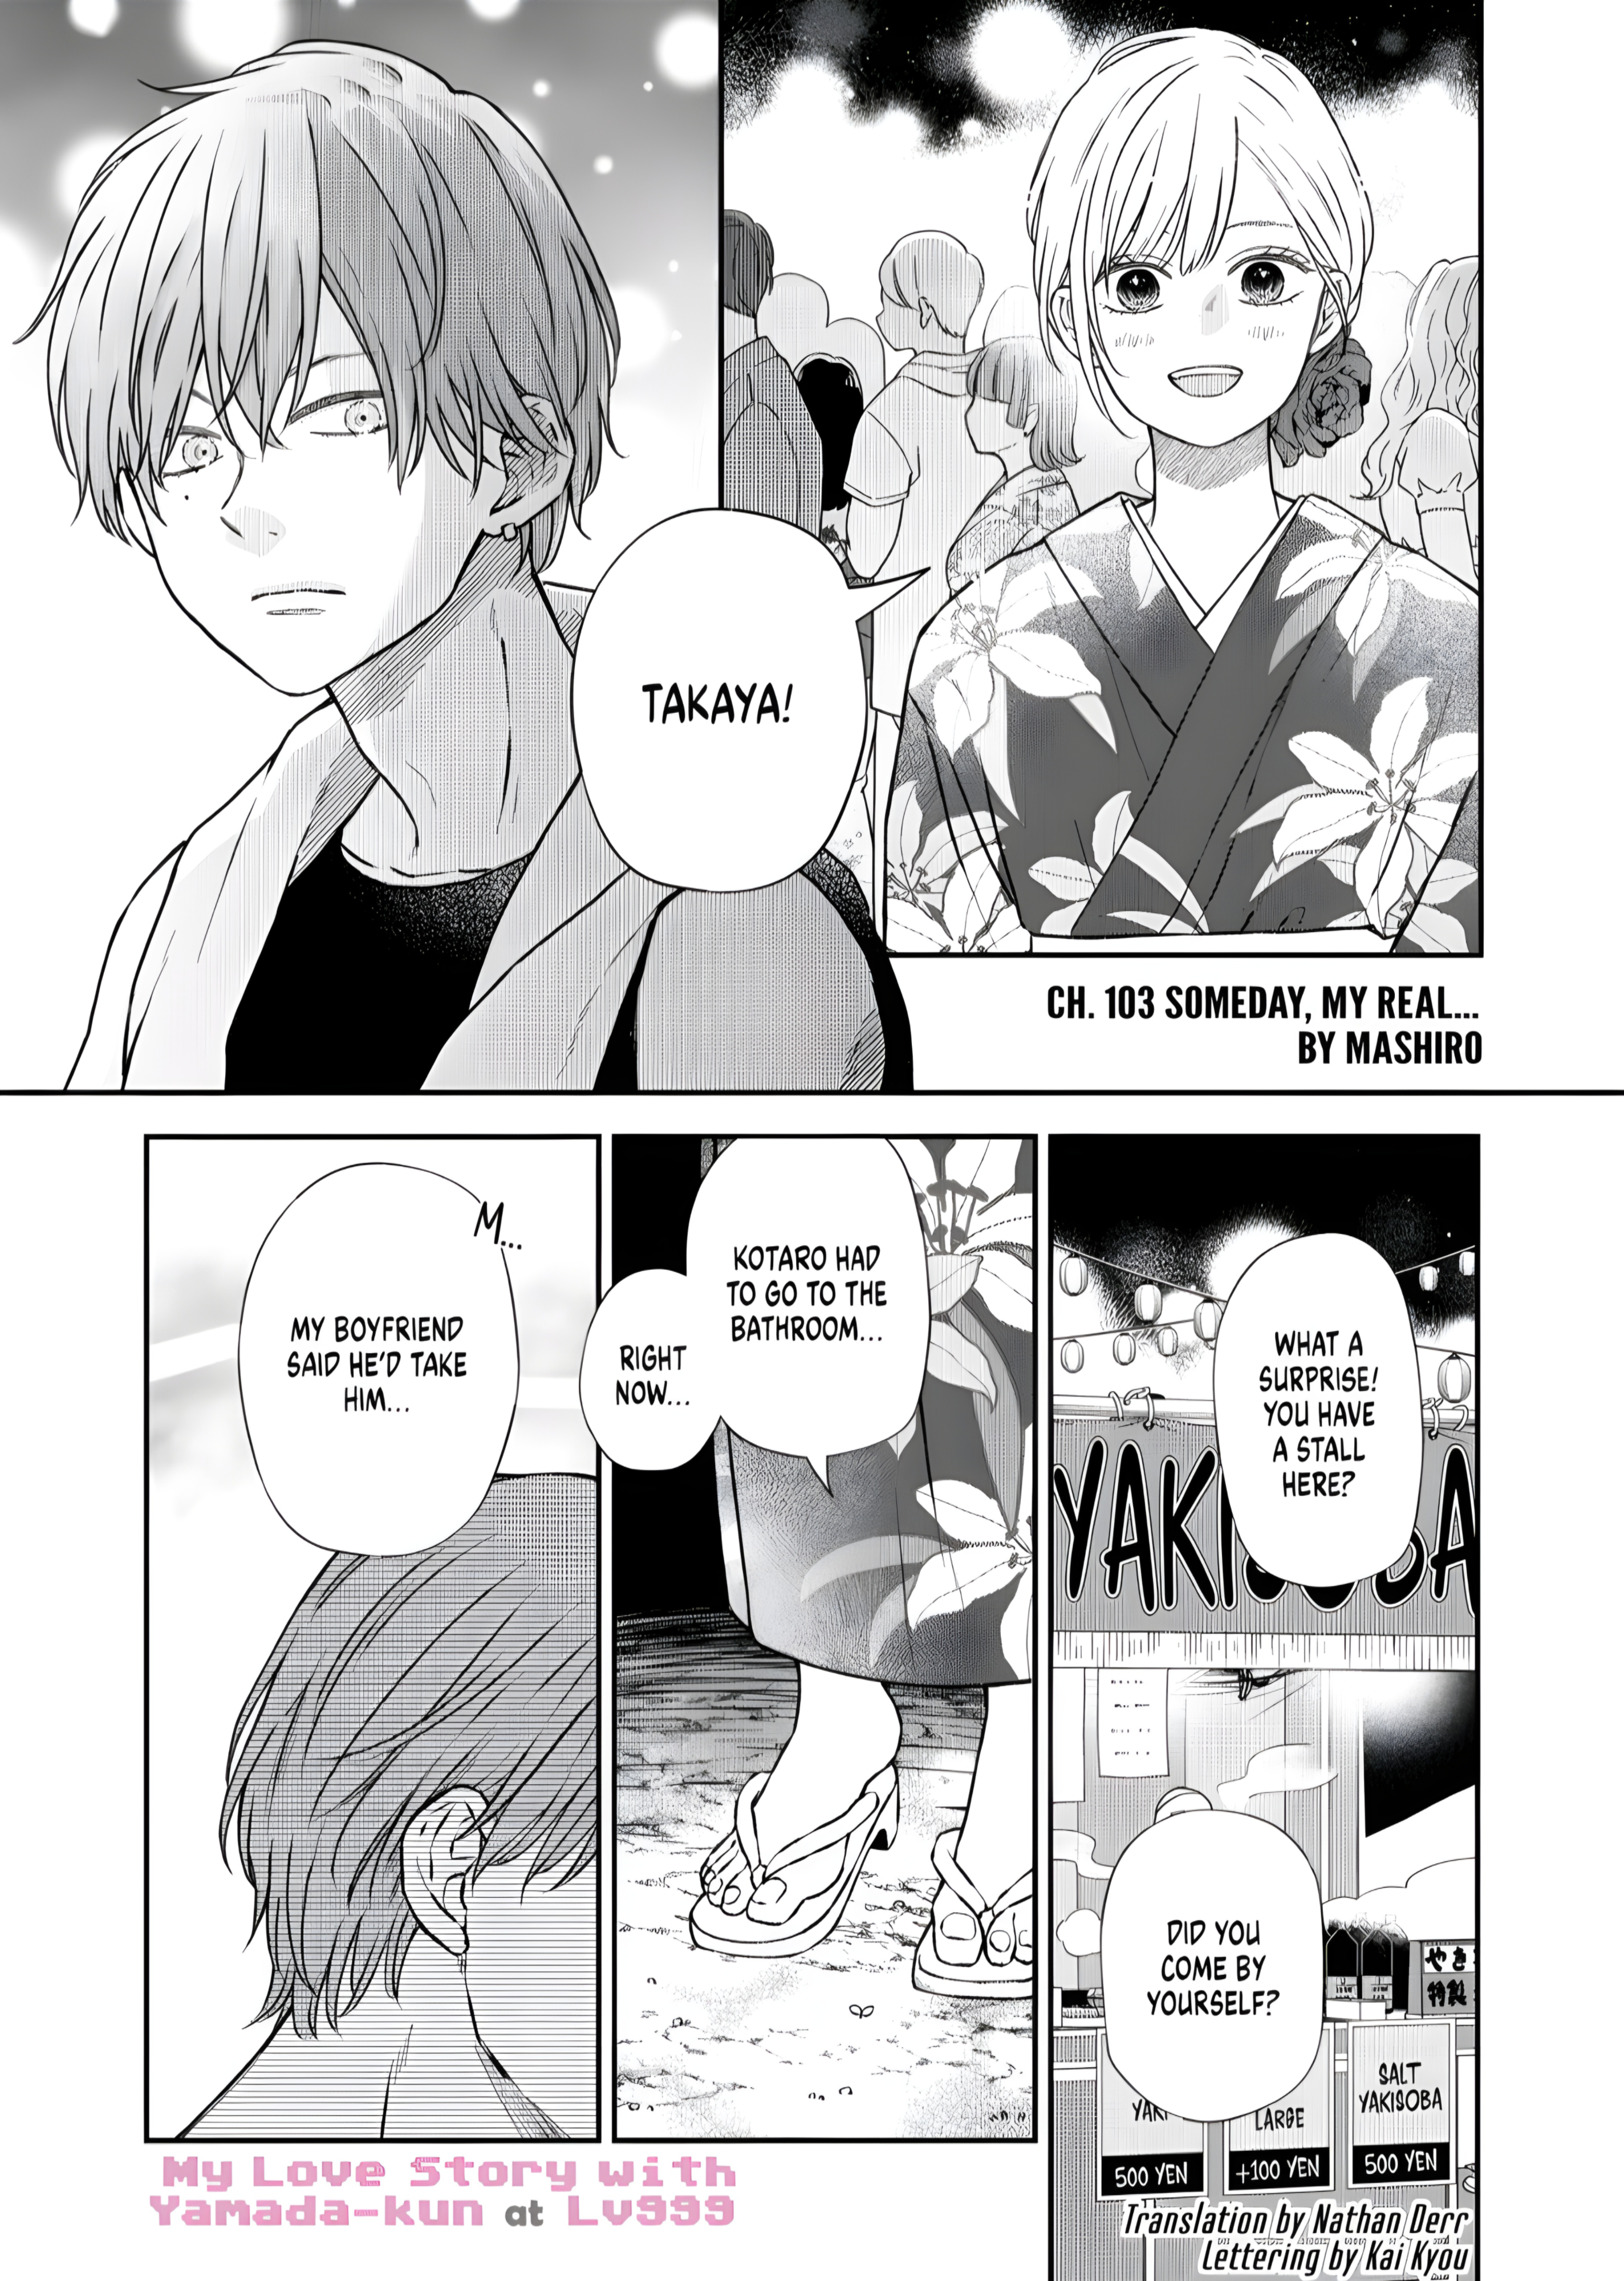 Chapter 103, My Love Story with Yamada-kun at Lv999